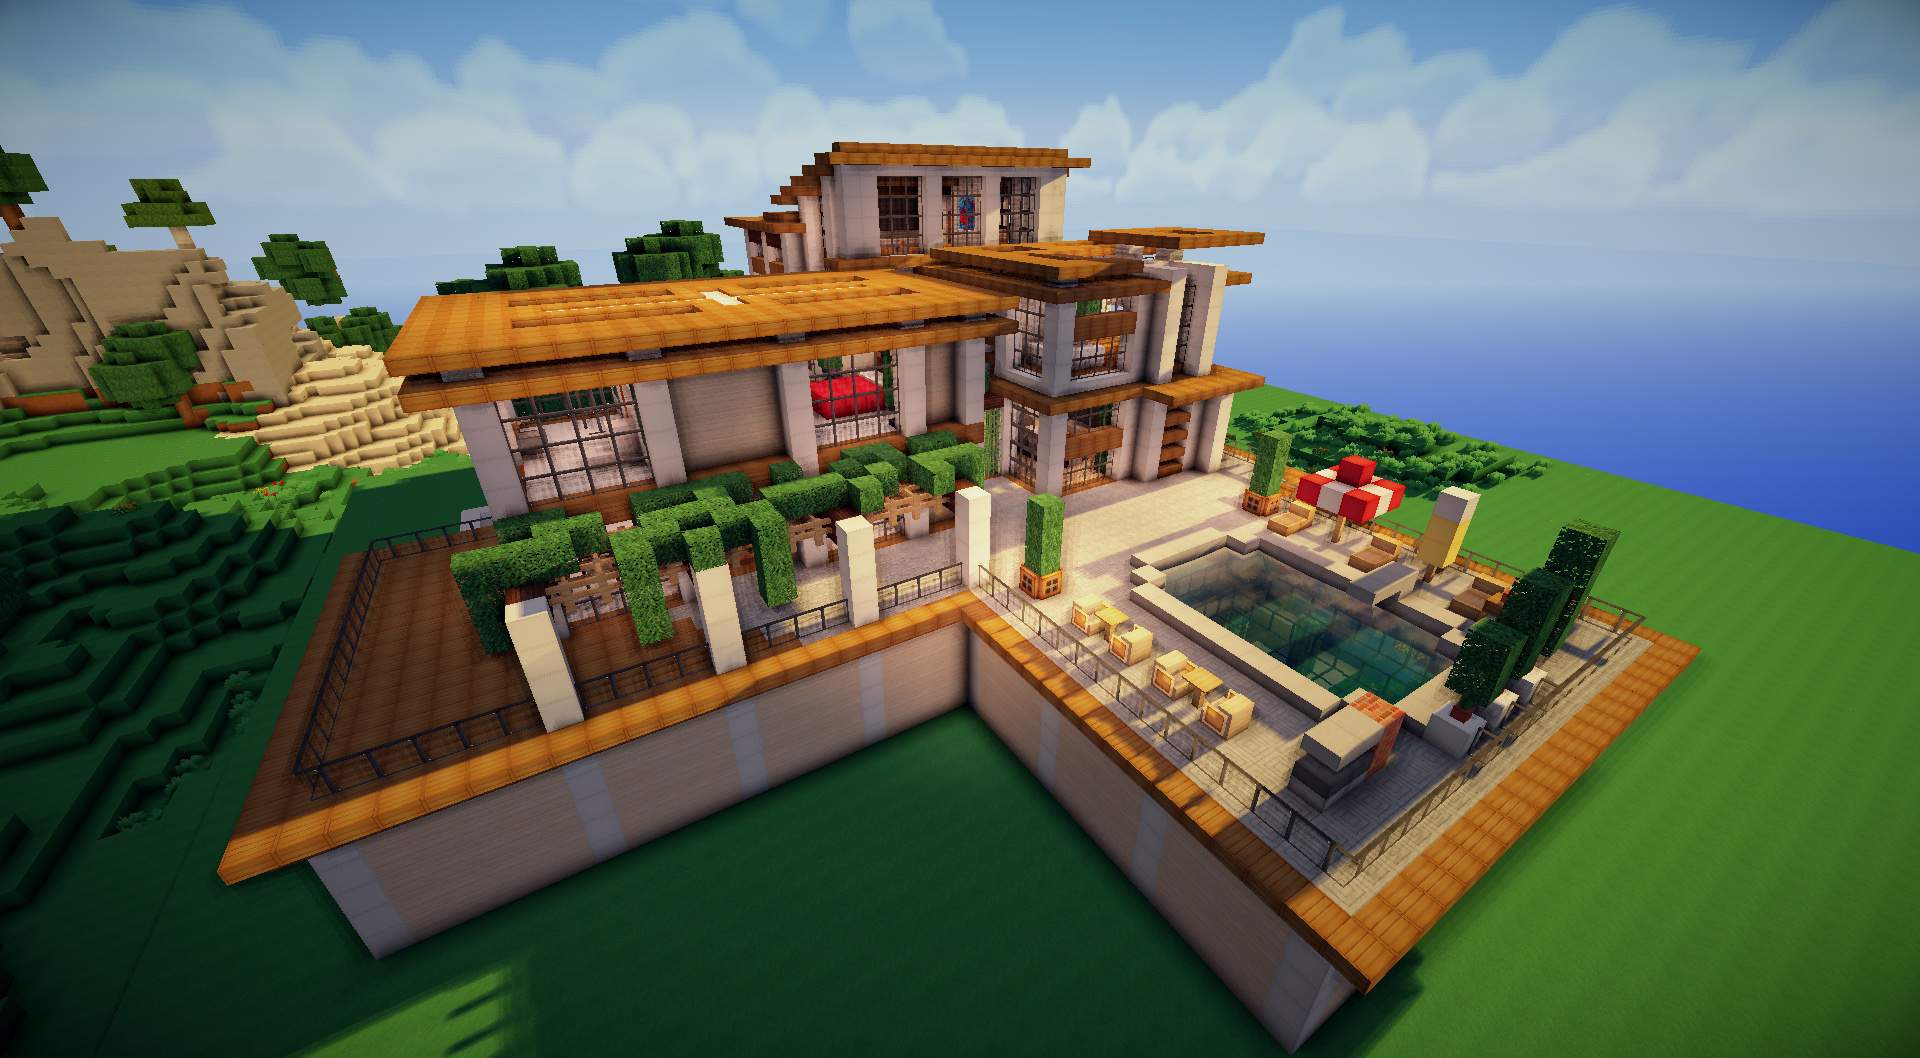 Rate this modern Minecraft house build from 1-10! 